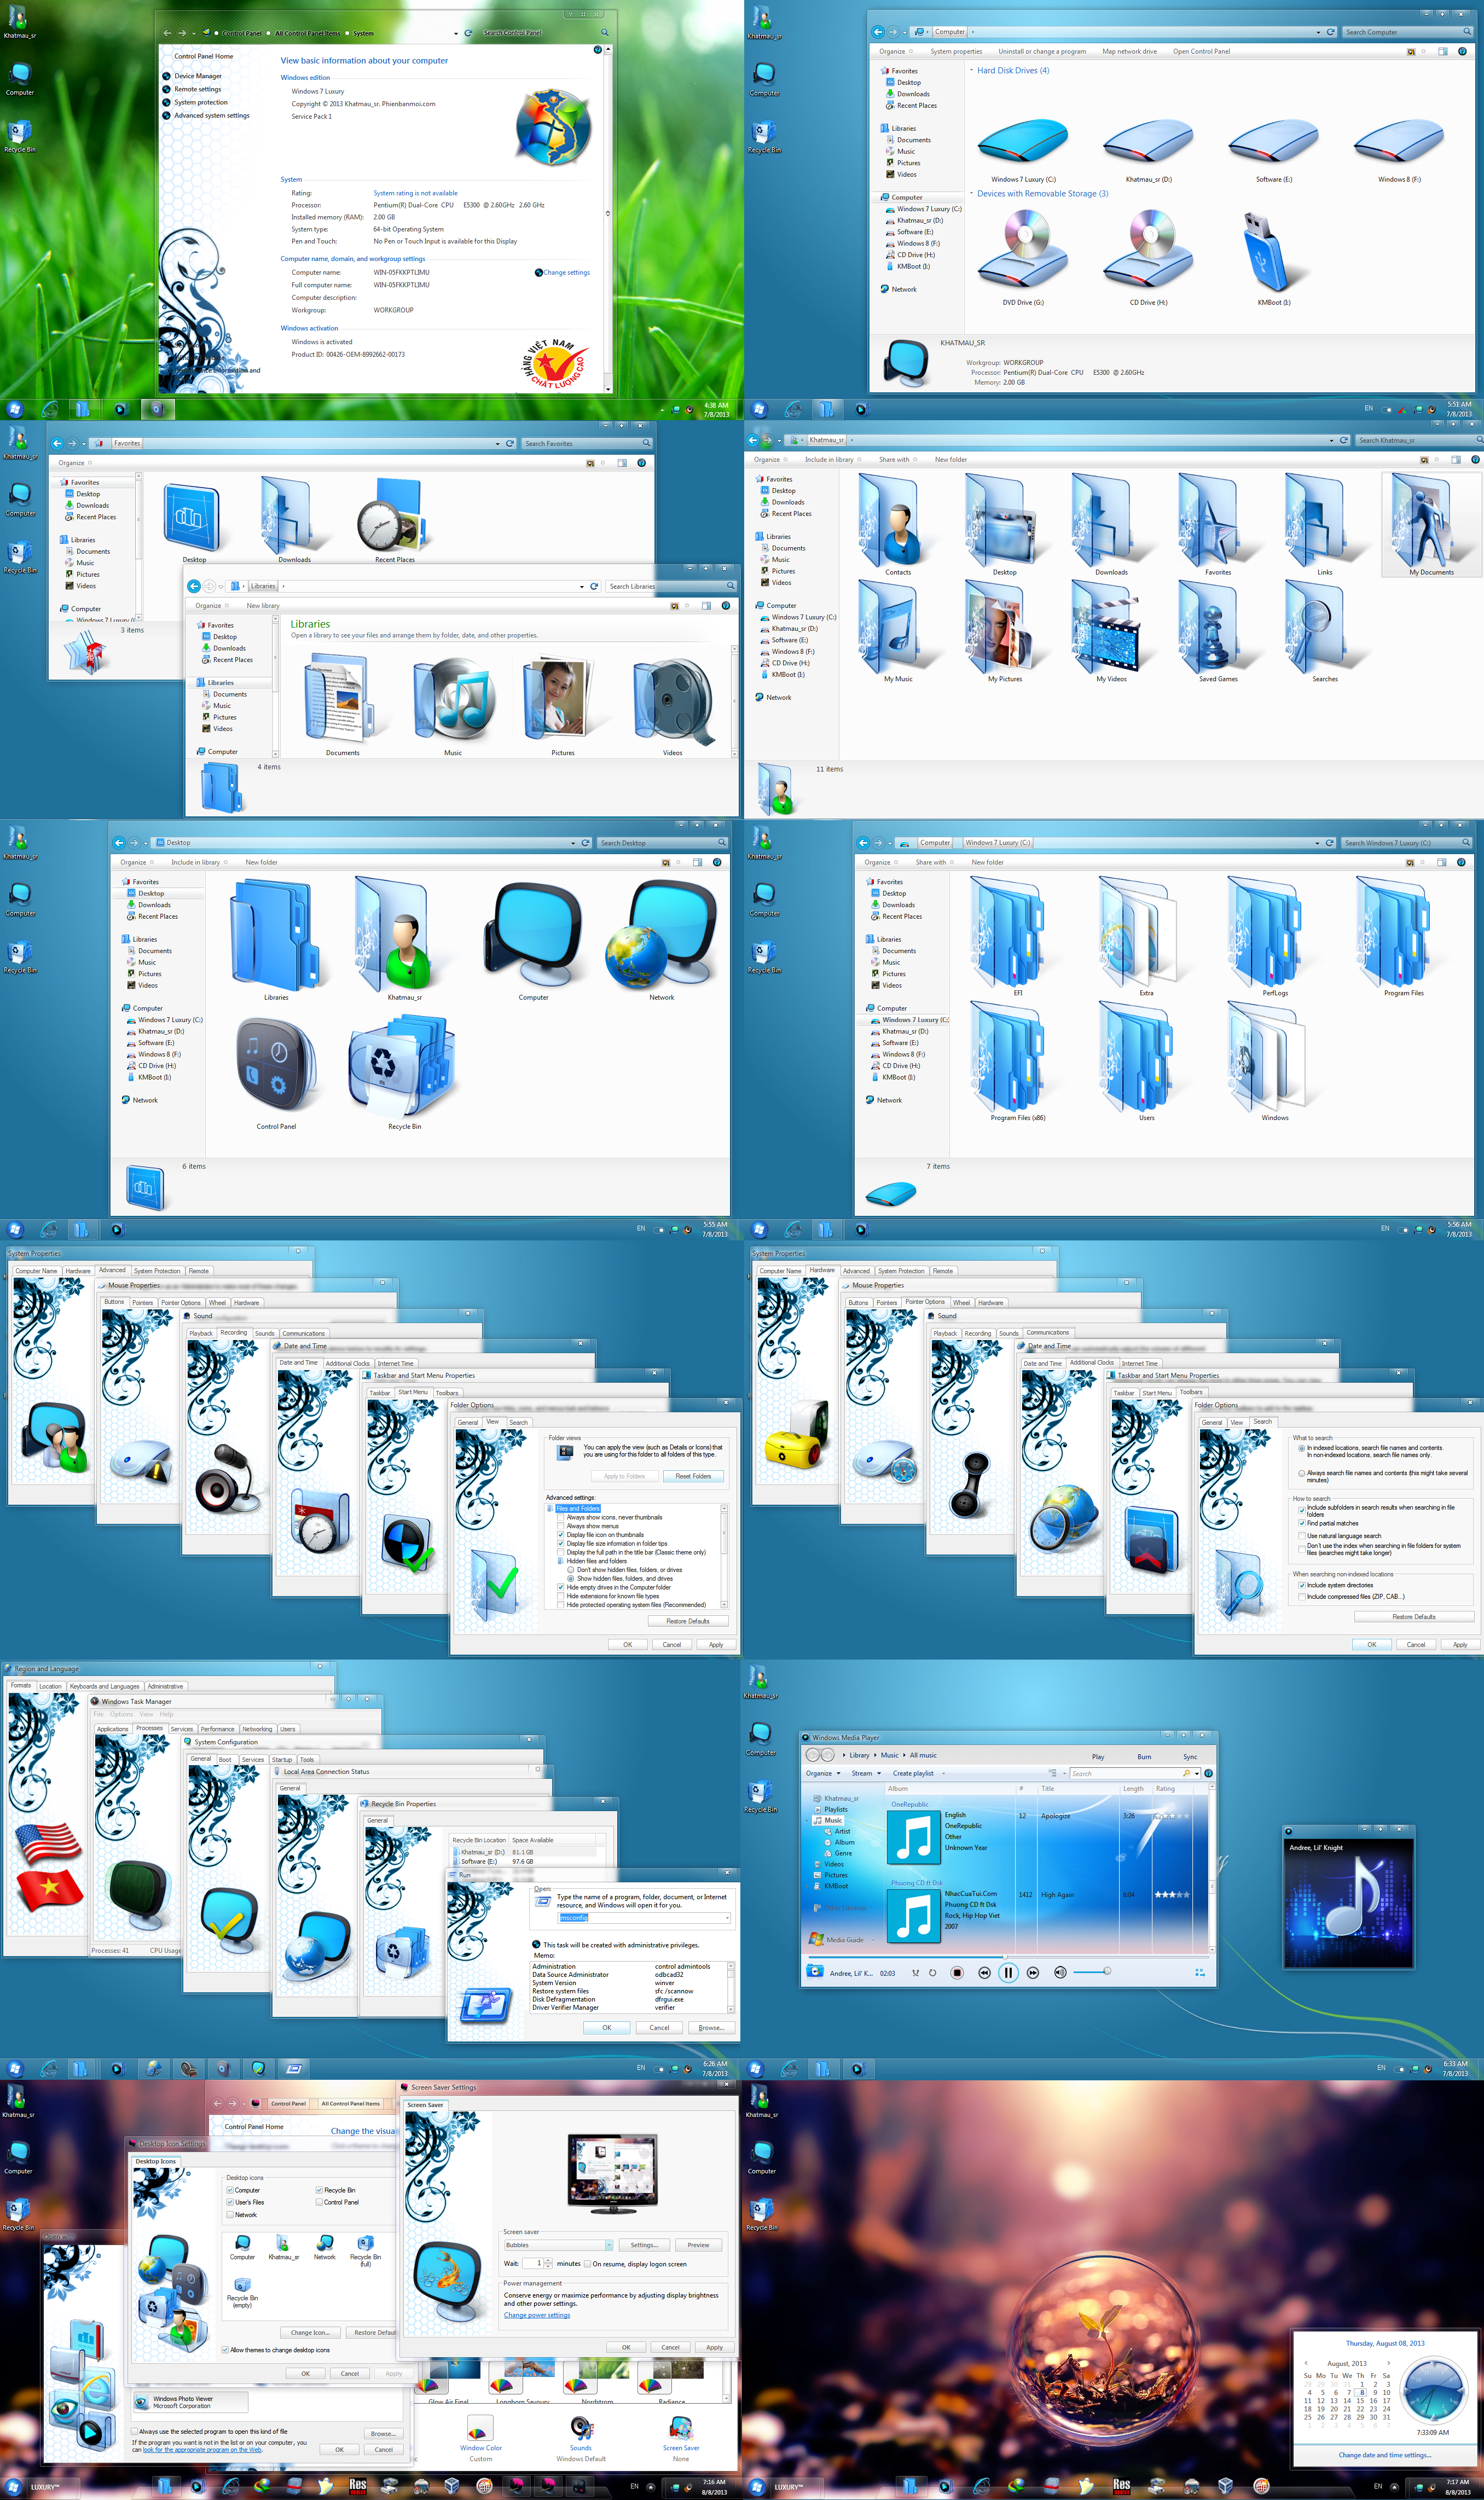 Windows 7 Sp1 Luxury (2013) x64 by Khatmau_sr Incl Activator @ Only By THE RAIN HKRG} preview 2